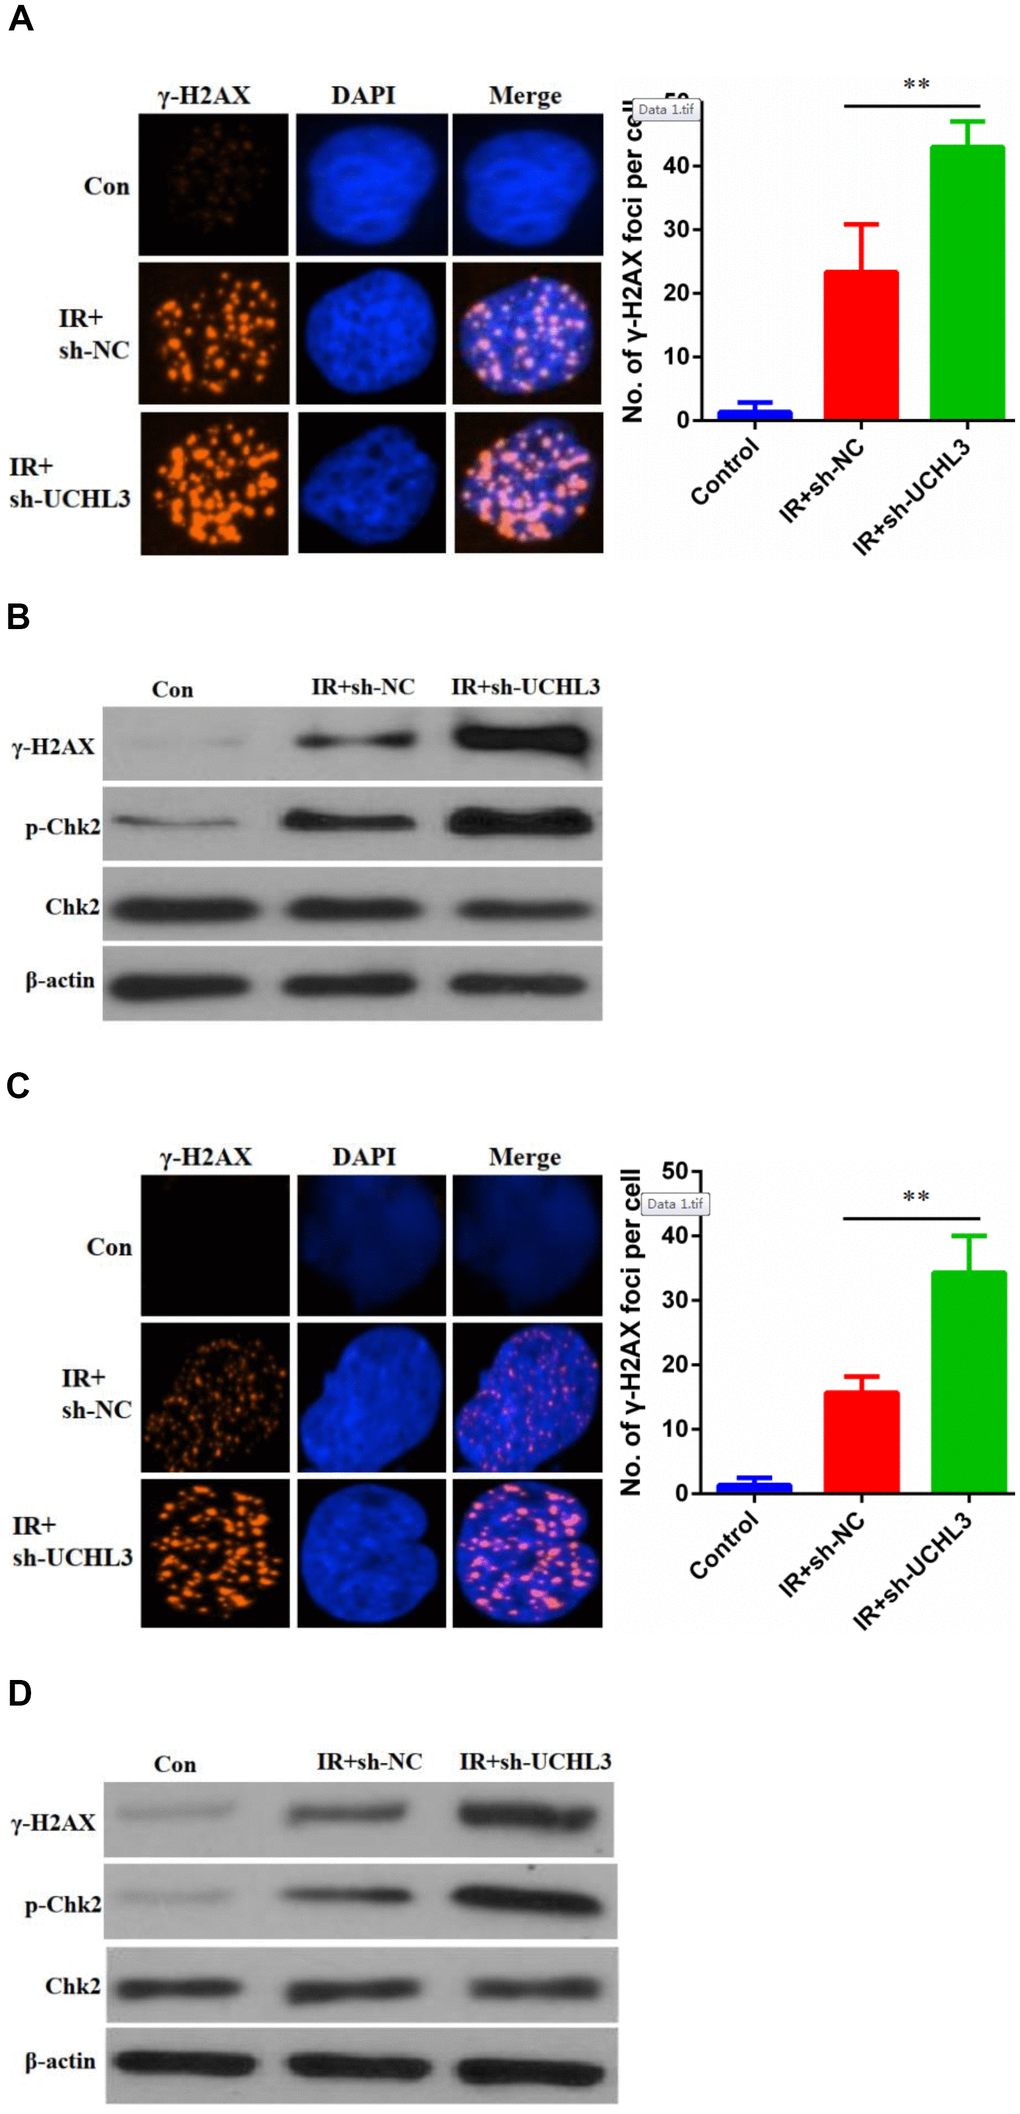 UCHL3 knockdown enhanced ionizing radiation-induced DNA damage. (A) γ-H2AX staining in A549 cells transfected with sh-NC and sh-UCHL3 after exposure to ionizing radiation (IR). (B) Western blot analysis of γ-H2AX, p-Chk2, Chk2 after A549 cells treated with indicated treatment. (C) γ-H2AX staining in H460 cells transfected with sh-NC and sh-UCHL3 after exposure to IR. (D) Western blot analysis of γ-H2AX, p-Chk2, Chk2 after H460 cells treated with indicated treatment. β-actin was used as a loading control. **P 